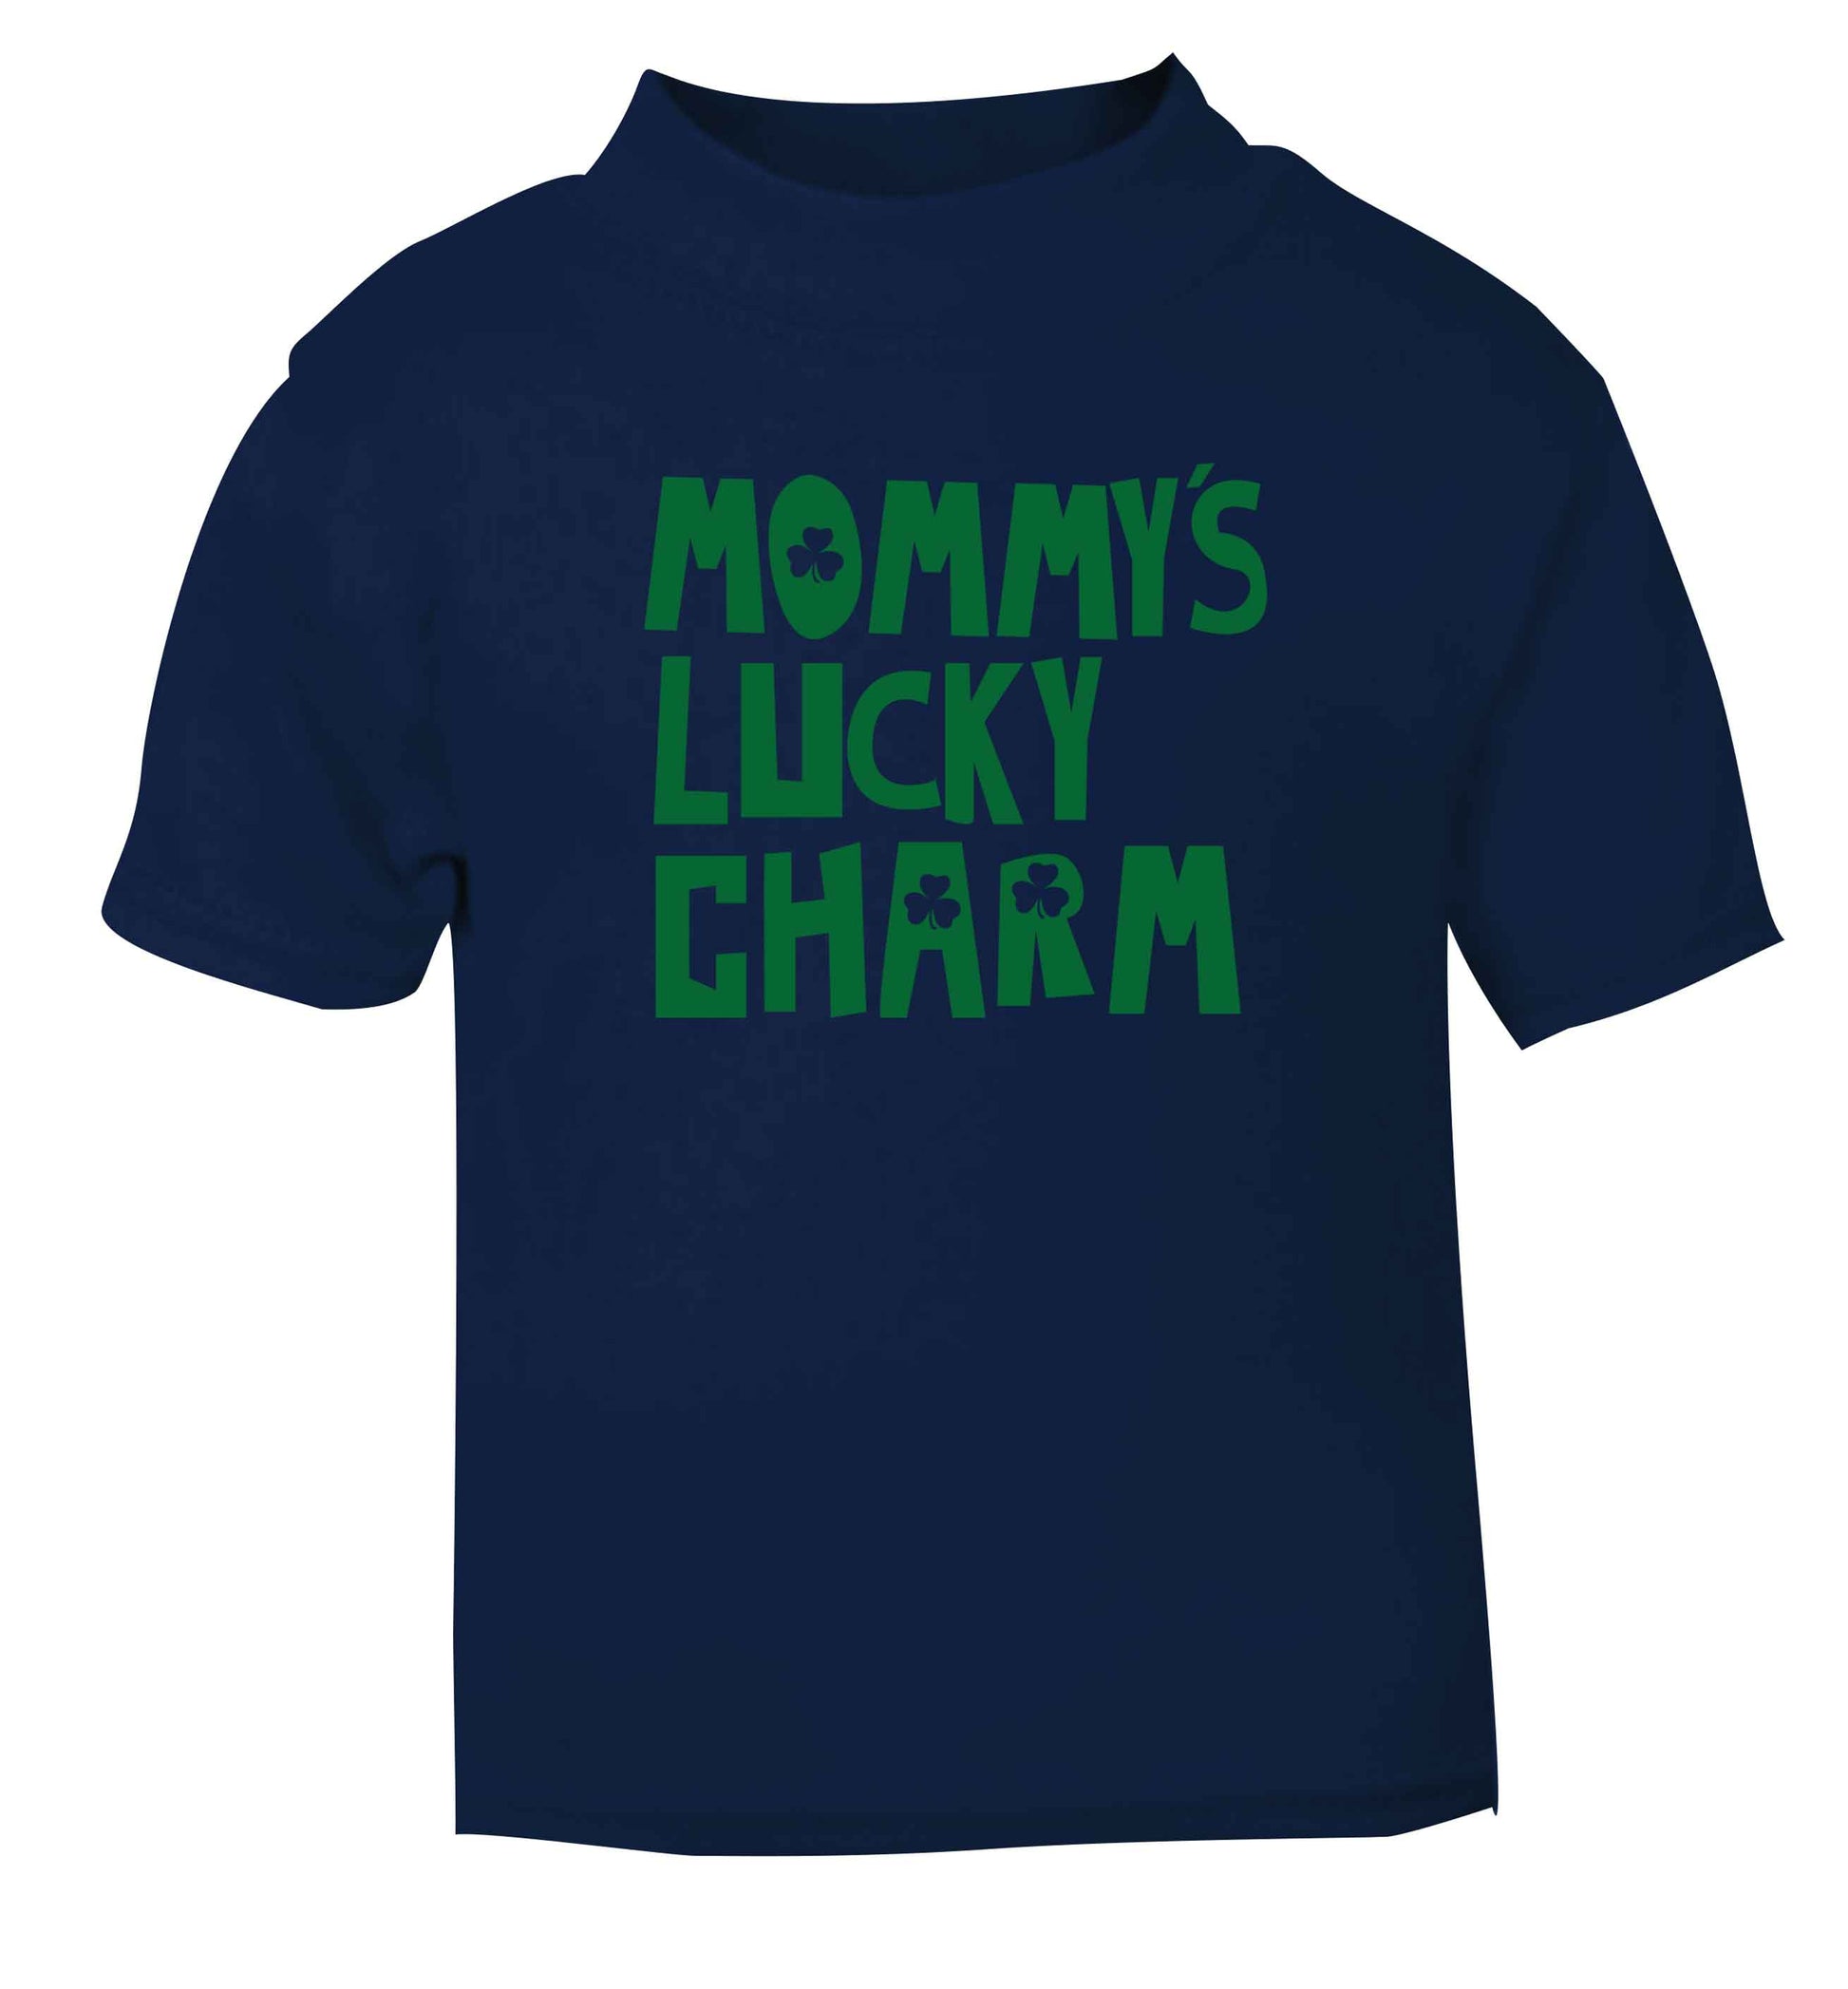 Mommy's lucky charm navy baby toddler Tshirt 2 Years